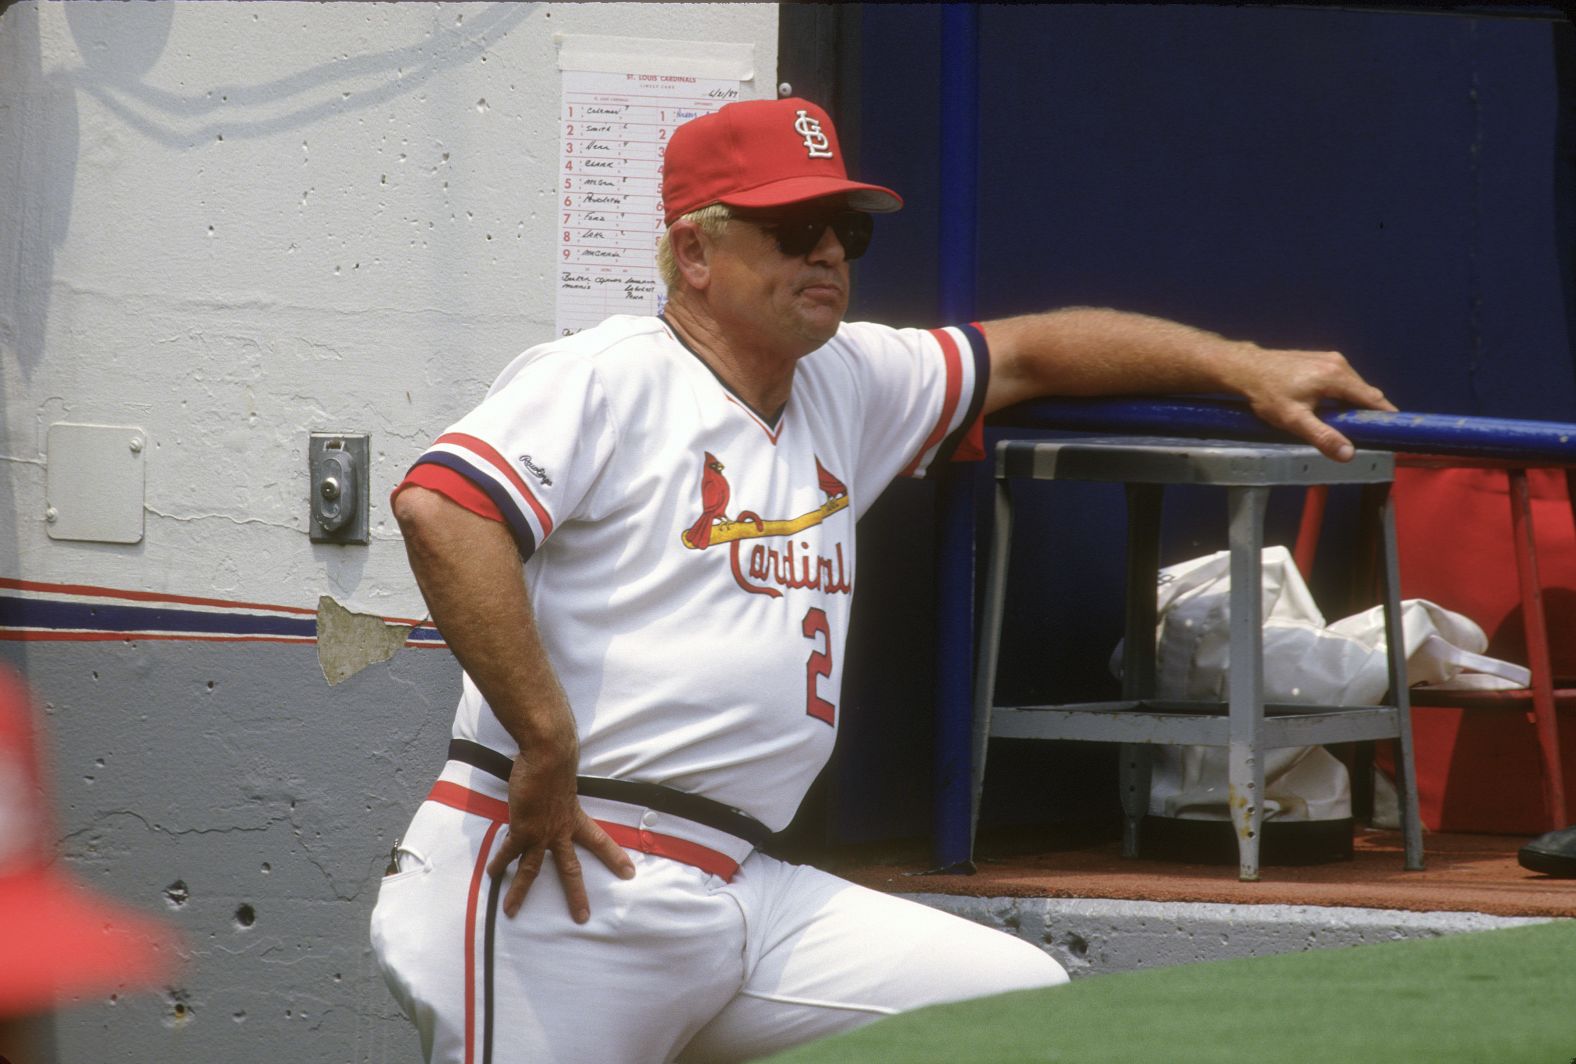 <a href="https://www.cnn.com/2024/04/16/sport/whitey-herzog-cardinals-dies" target="_blank">Whitey Herzog</a>, the Baseball Hall of Famer who managed the St. Louis Cardinals to the 1982 World Series title with a style of play known as "Whiteyball," has died, his family announced via the Cardinals. He was 92.